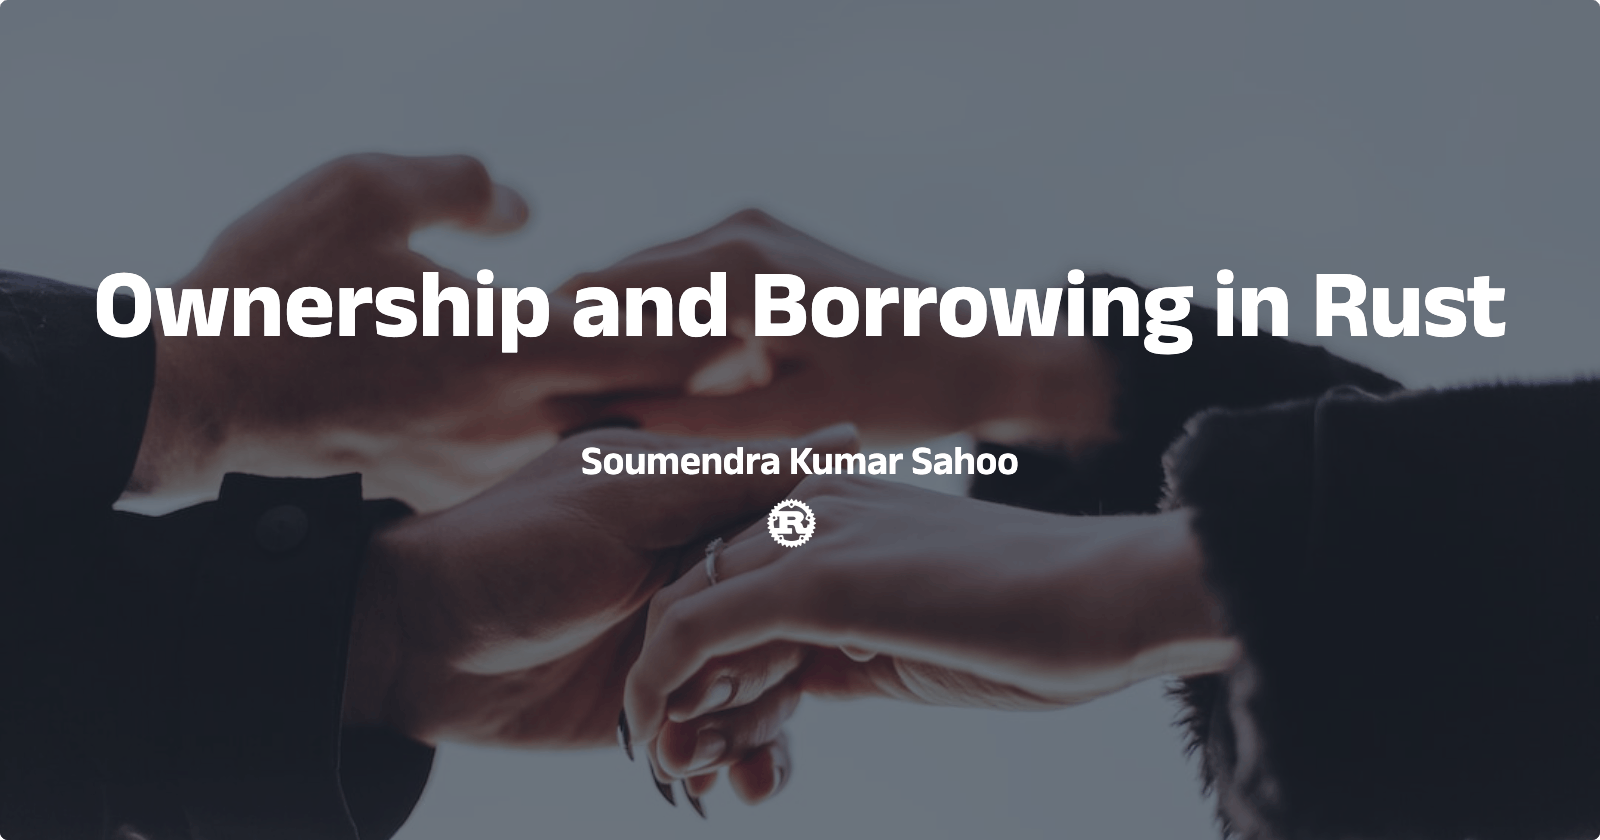 Ownership and Borrowing in Rust